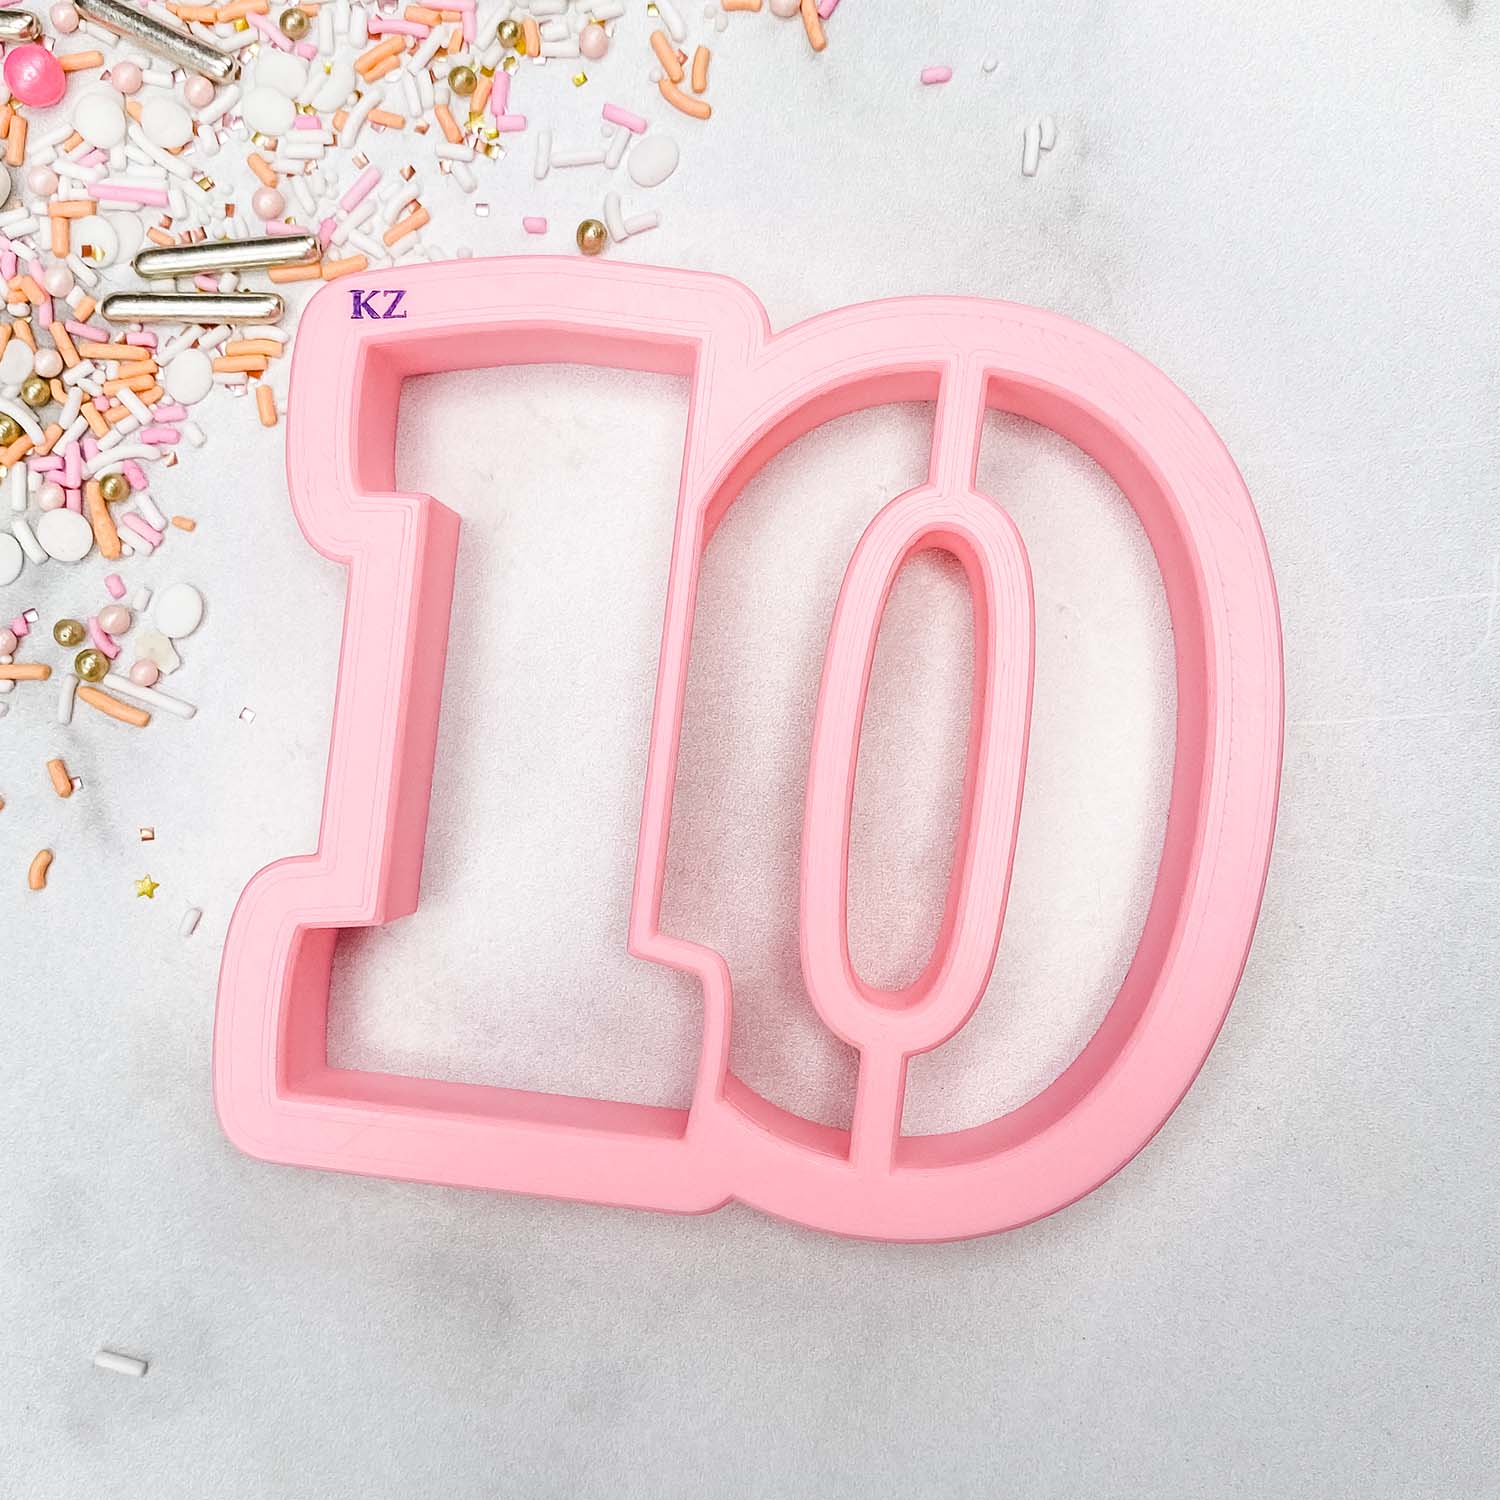 cookie cutter in the shape of the number 10